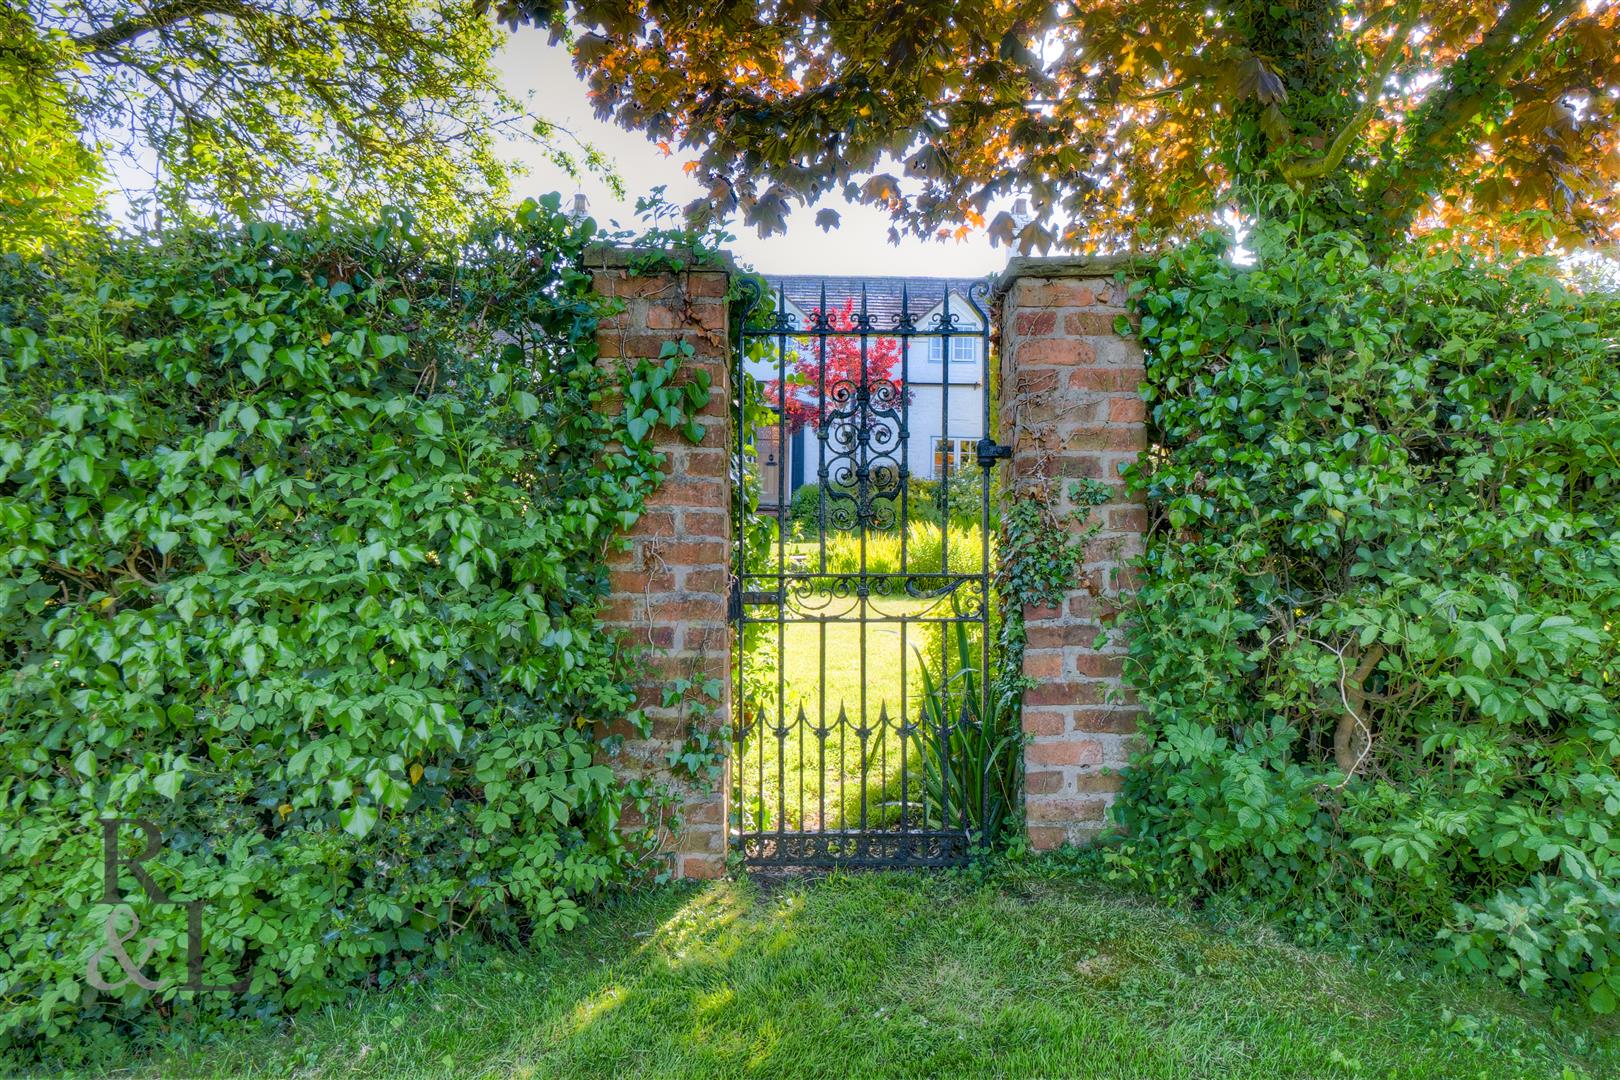 Property image for The Green, Old Dalby, Melton Mowbray